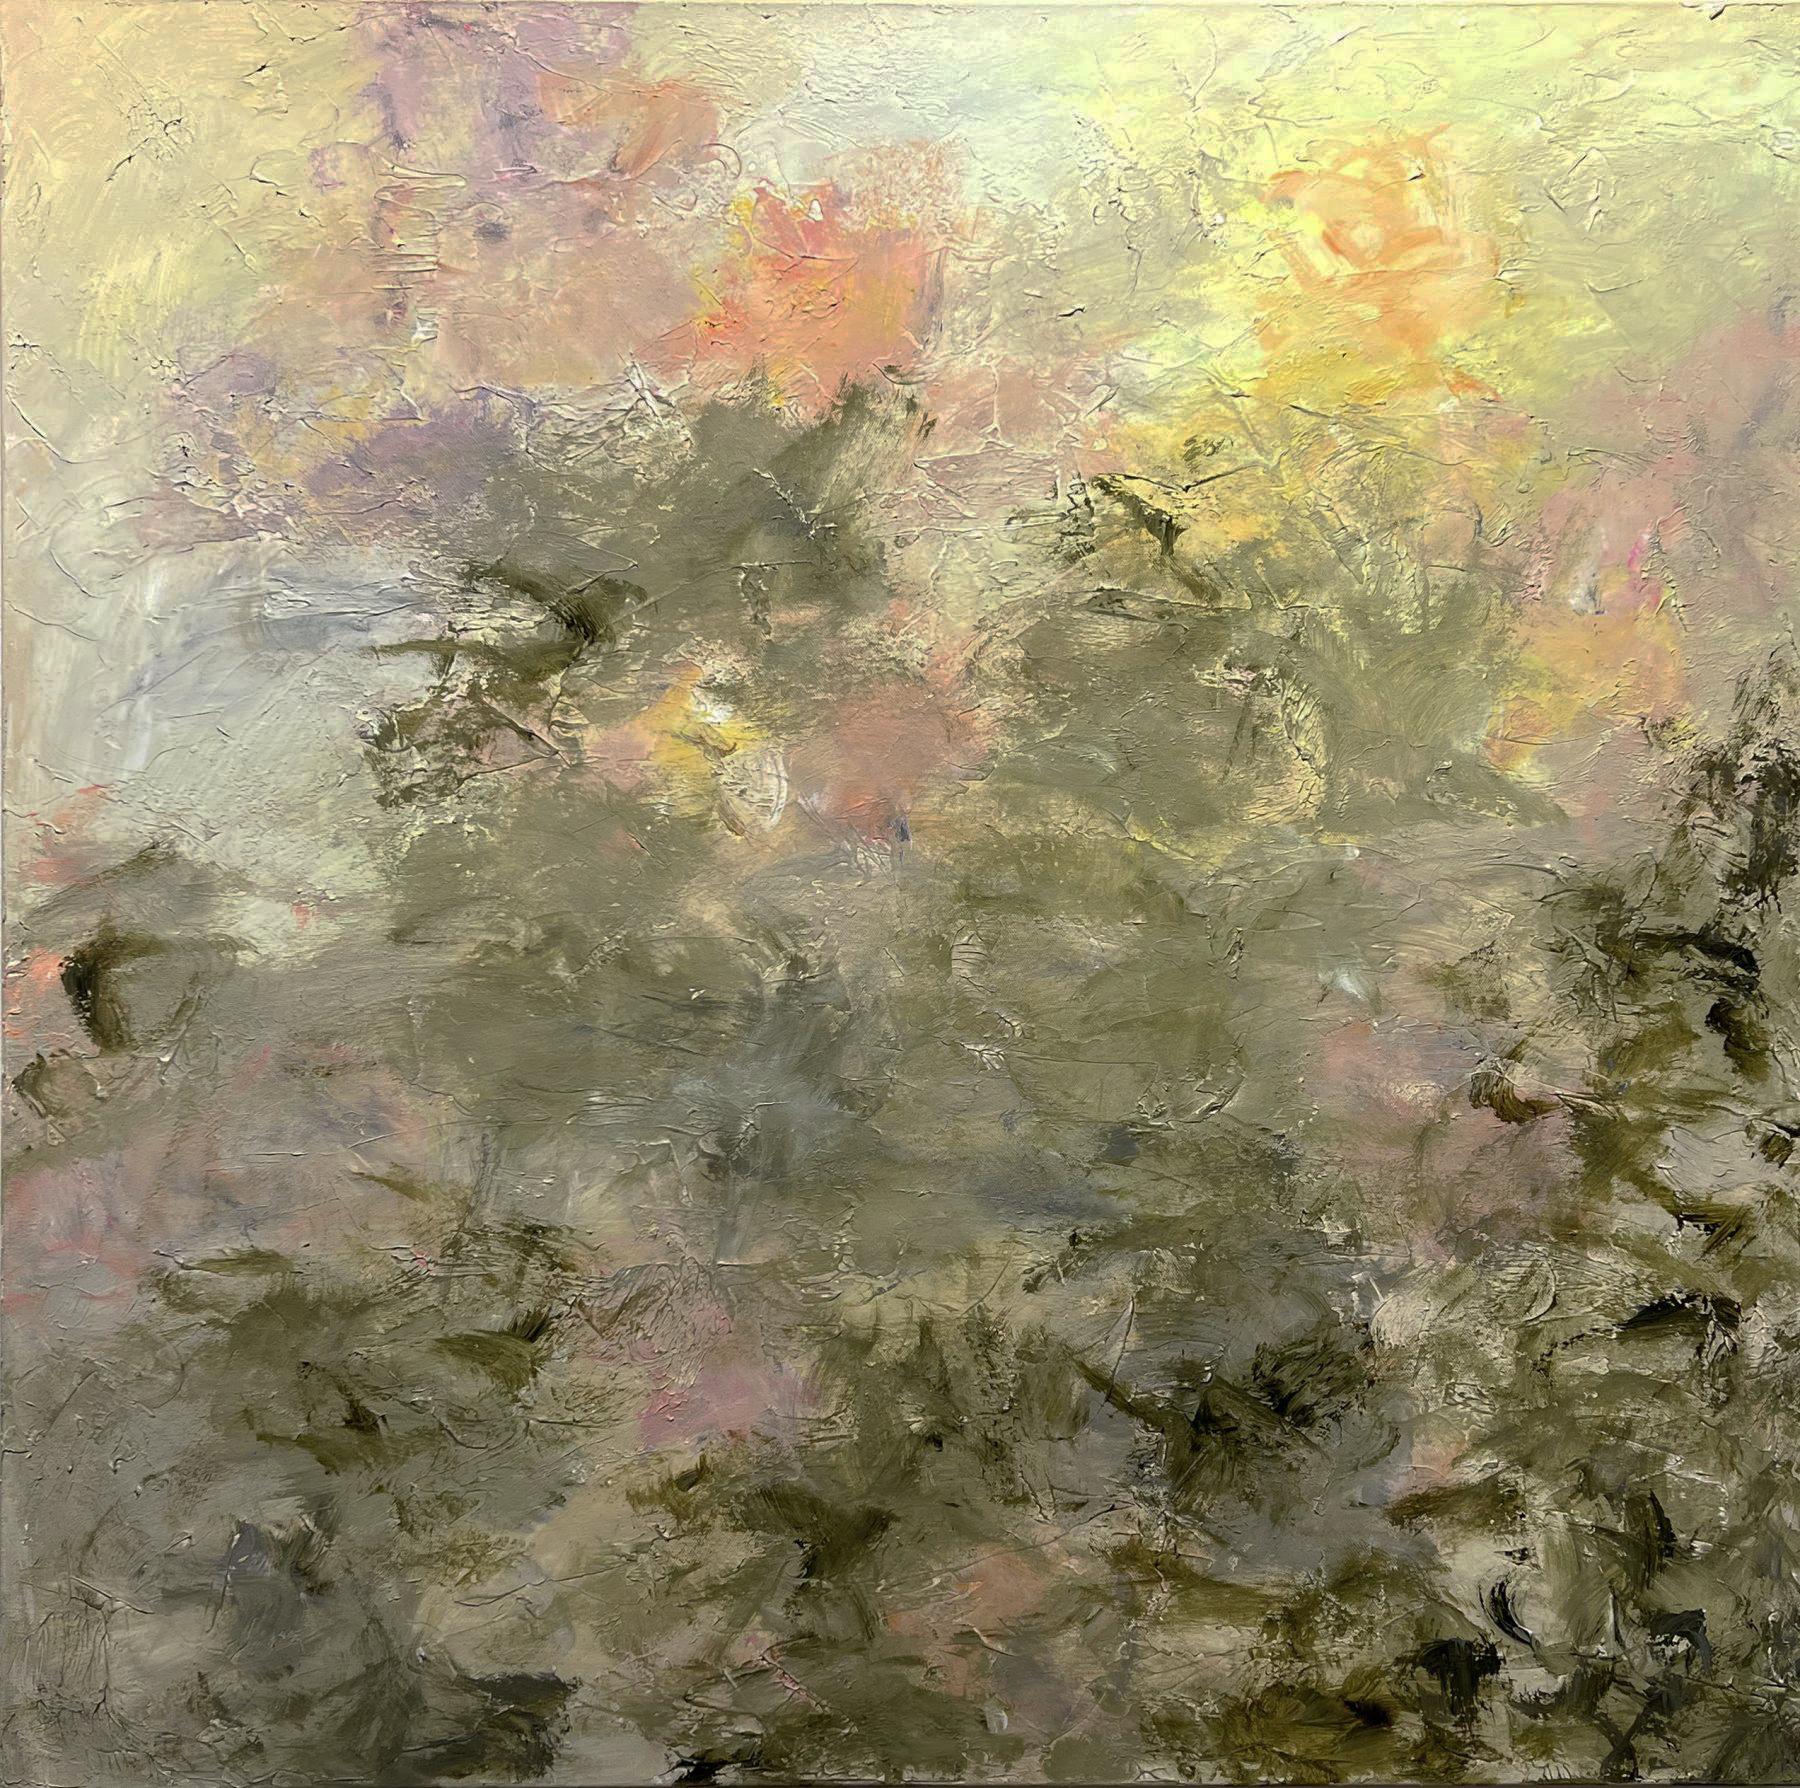 Gary Zack, "Golden Blush", 36x36 Atmospheric Pink Floral Oil Painting on Canvas